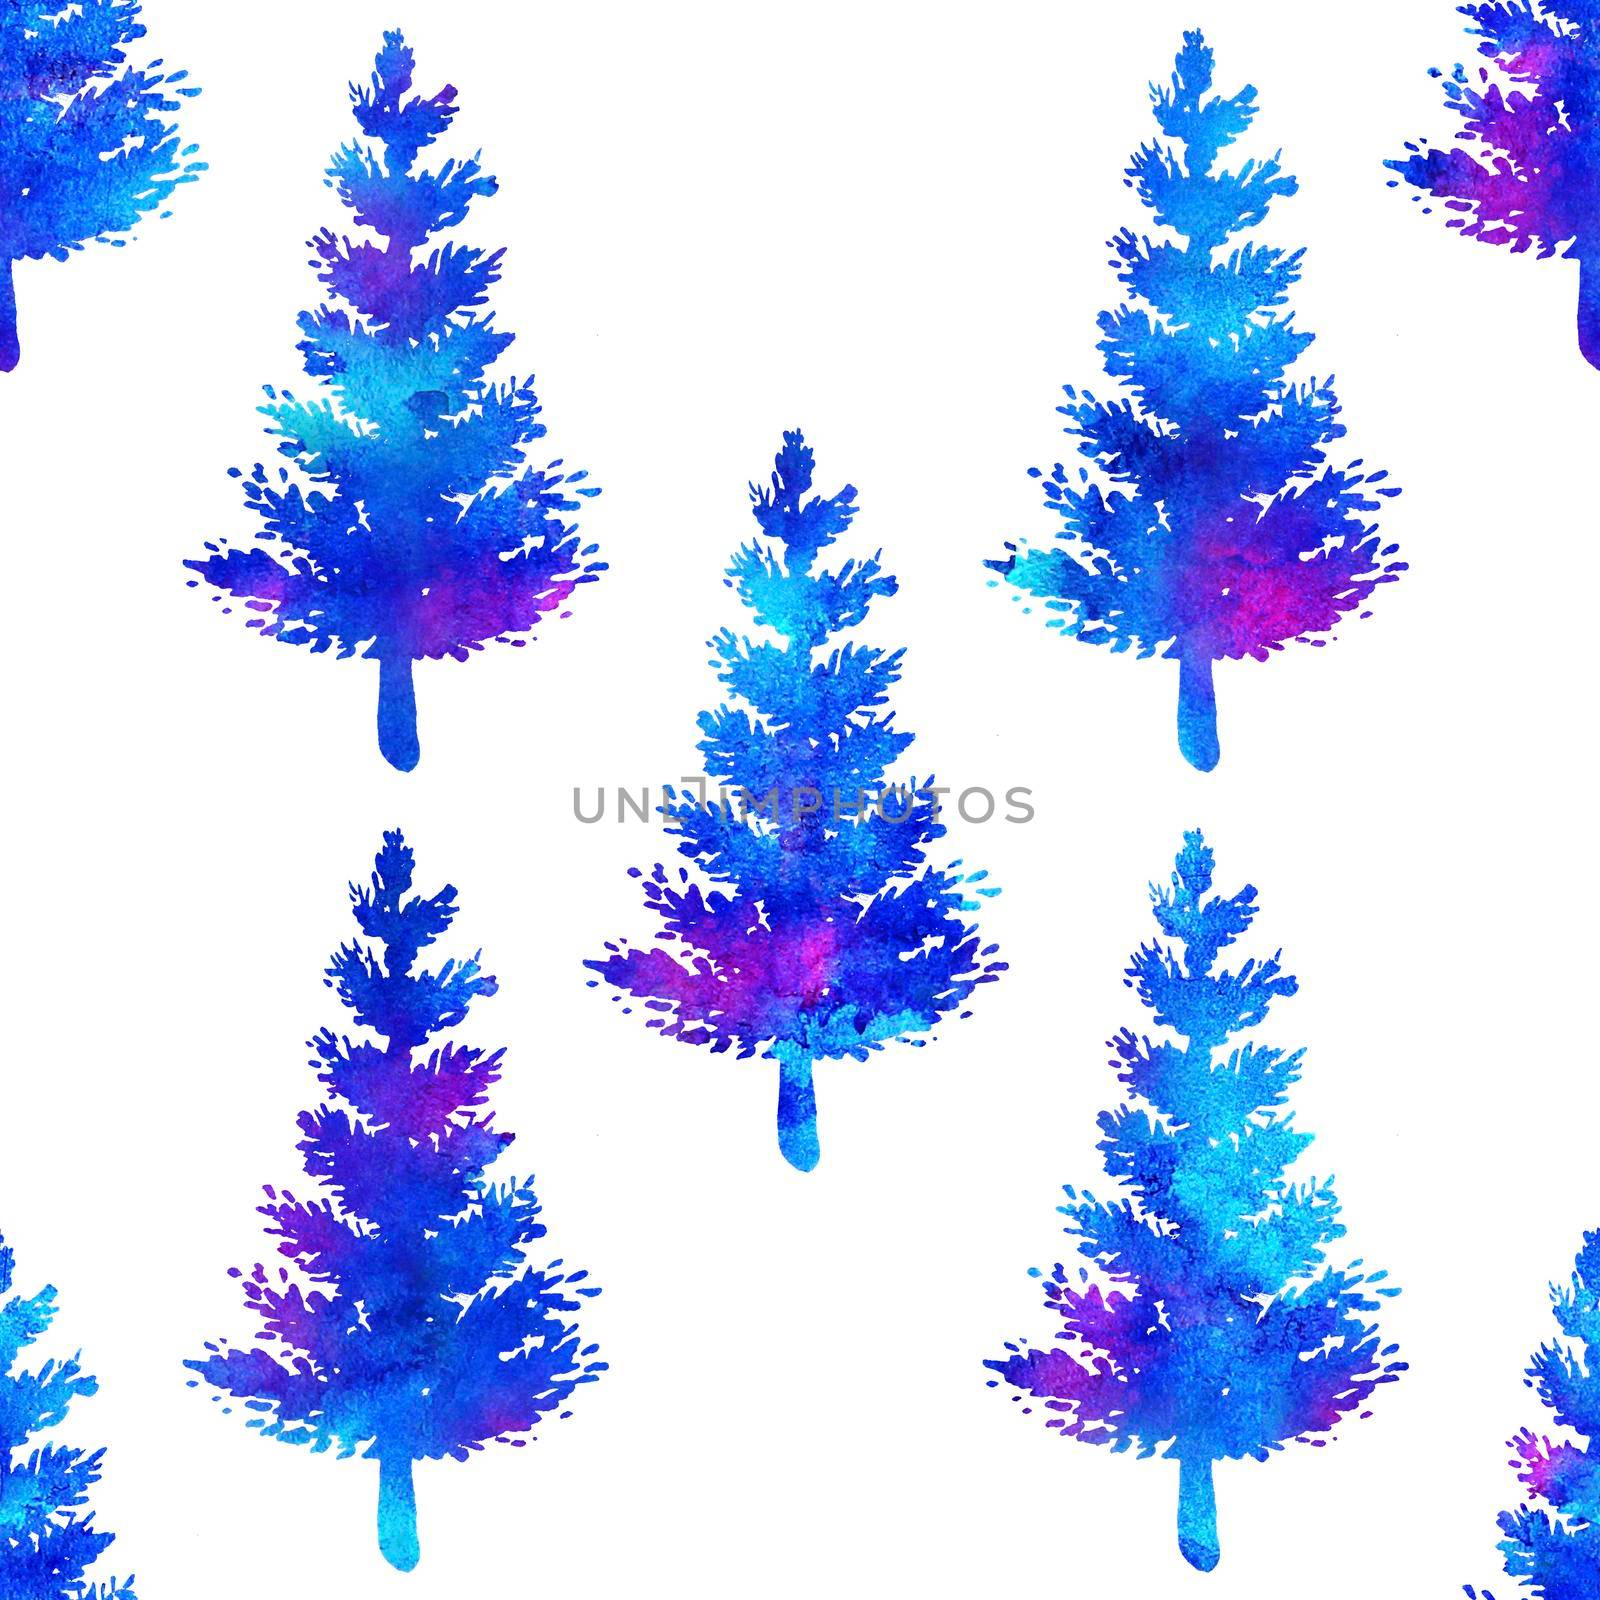 XMAS watercolour Fir Tree Seamless Pattern in Blue Color on white background. Hand-Painted Watercolor Spruce Pine tree wallpaper for Ornament, Wrapping or Christmas Decoration by DesignAB